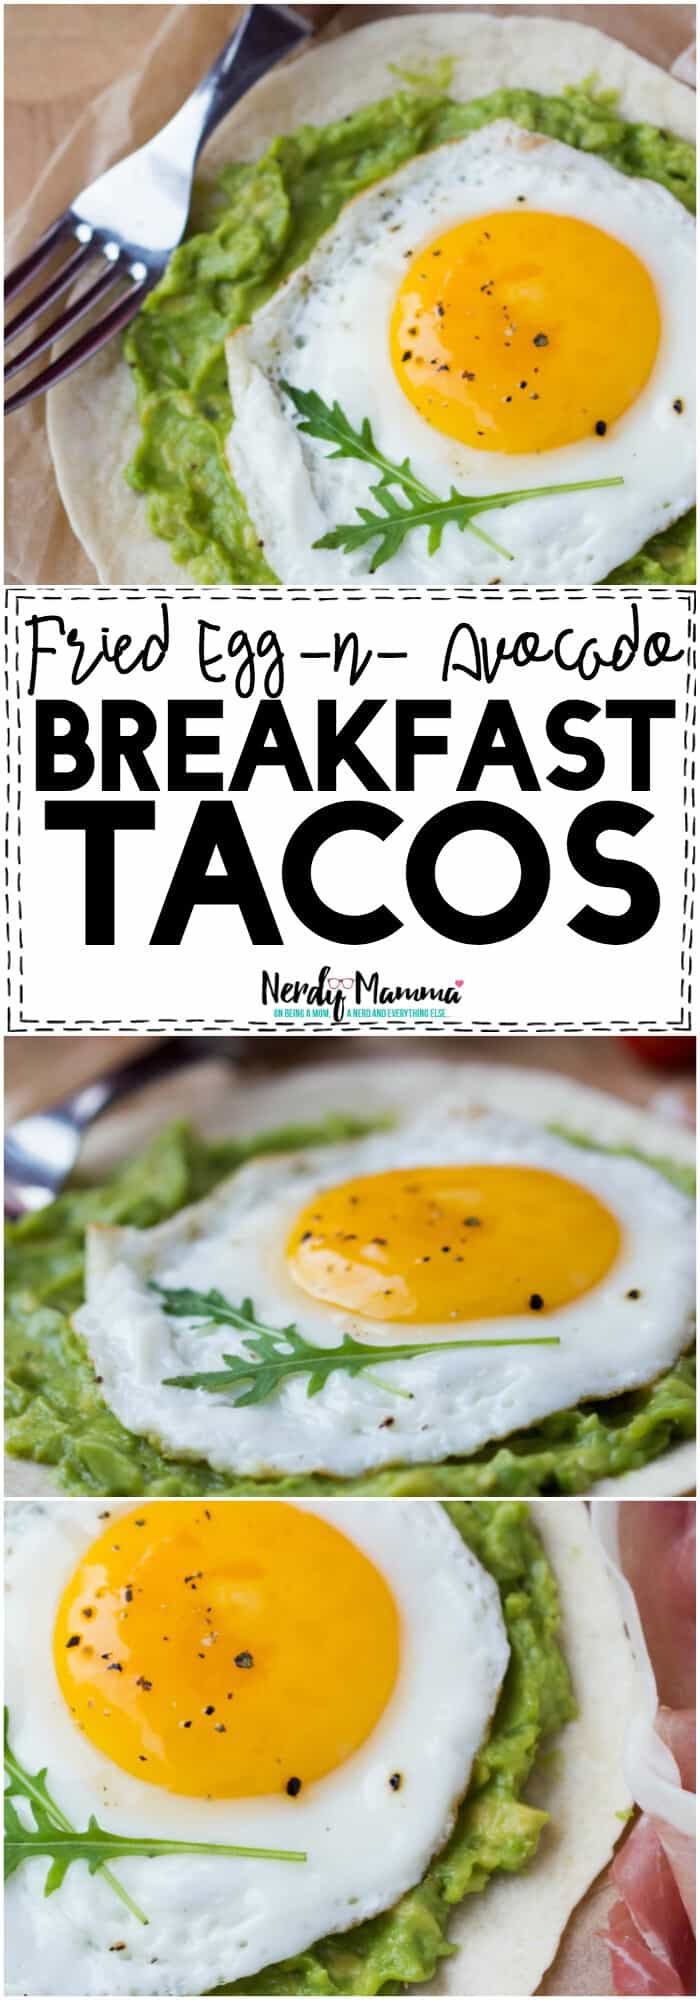 This is the simplest recipe for Fried Egg and Avocado Breakfast Tacos. So yummy! #breakfast #easy #taco #tacorecipe #recipe #breakfastrecipe #breakfasttacorecipe